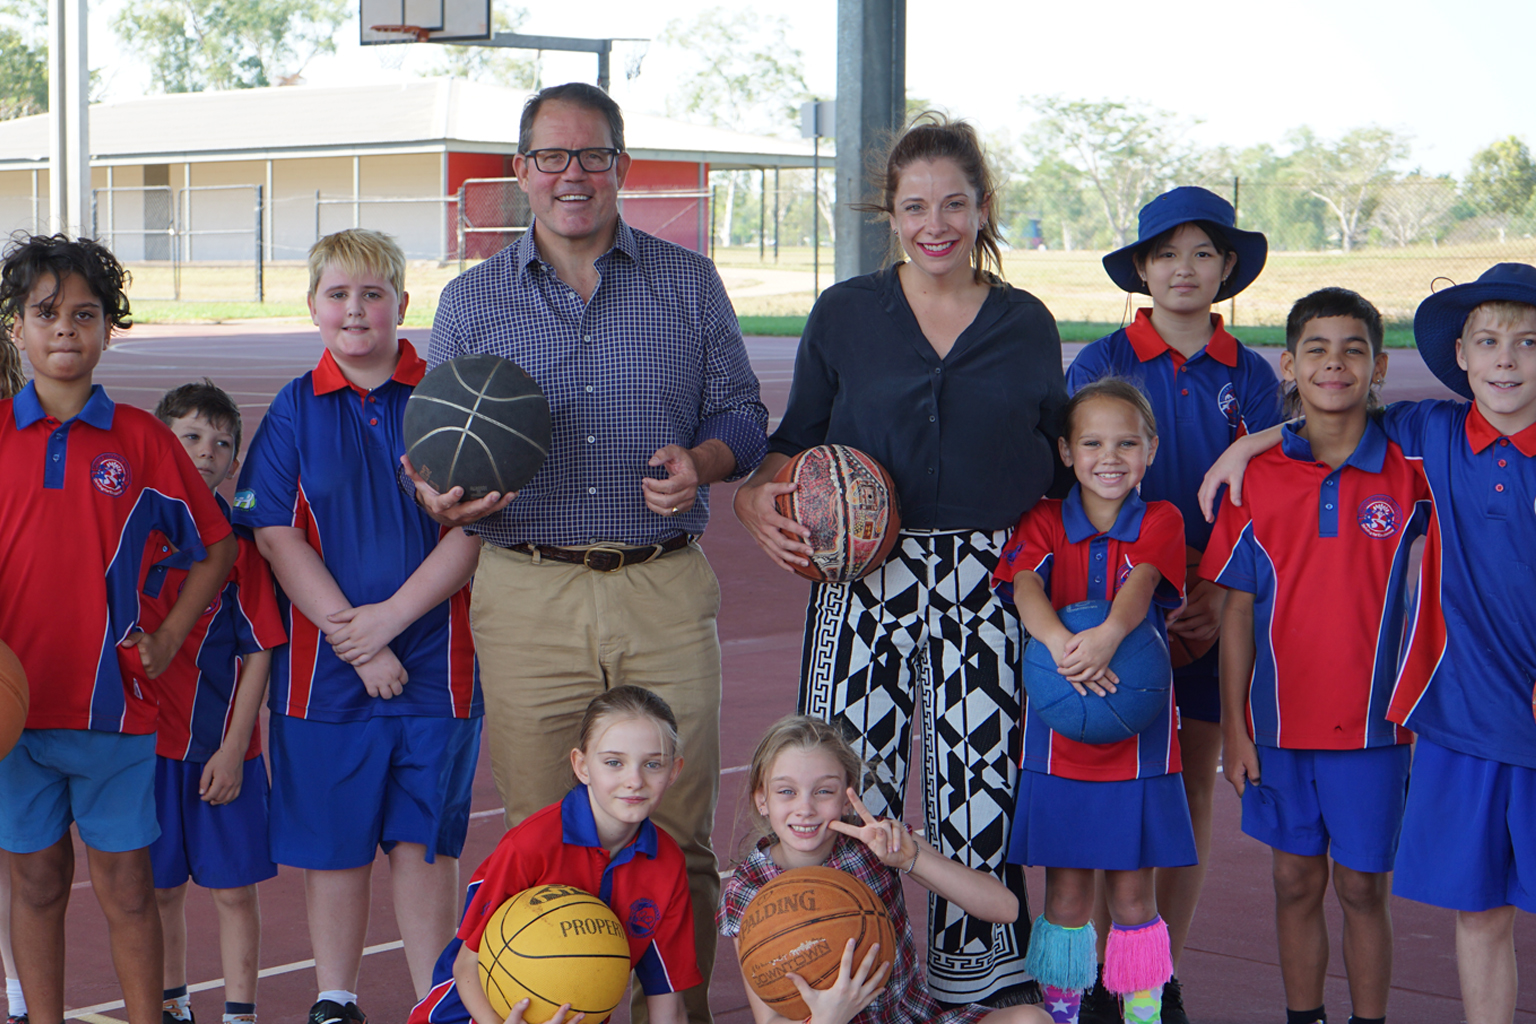 A group of children holding basketballs gathered on a court with MPs Luke Gosling and Anika Wells